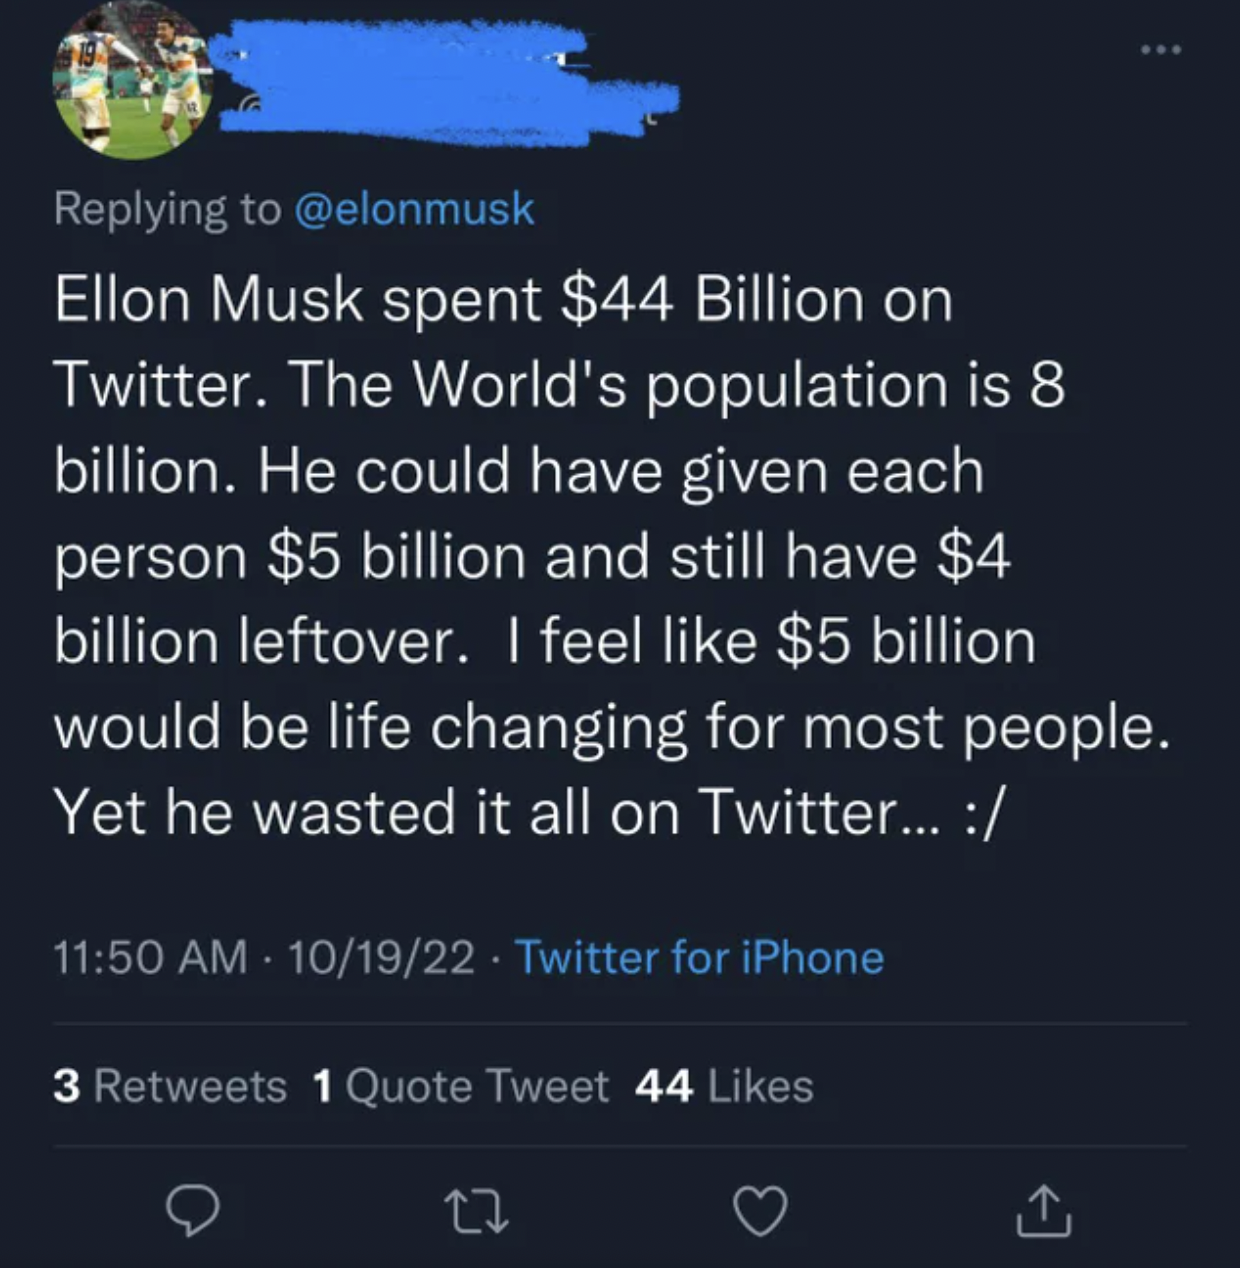 Confidently Incorrect - atmosphere - Ellon Musk spent $44 Billion on Twitter. The World's population is 8 billion. He could have given each person $5 billion and still have $4 billion leftover. I feel $5 billion would be life changing for most people. Yet